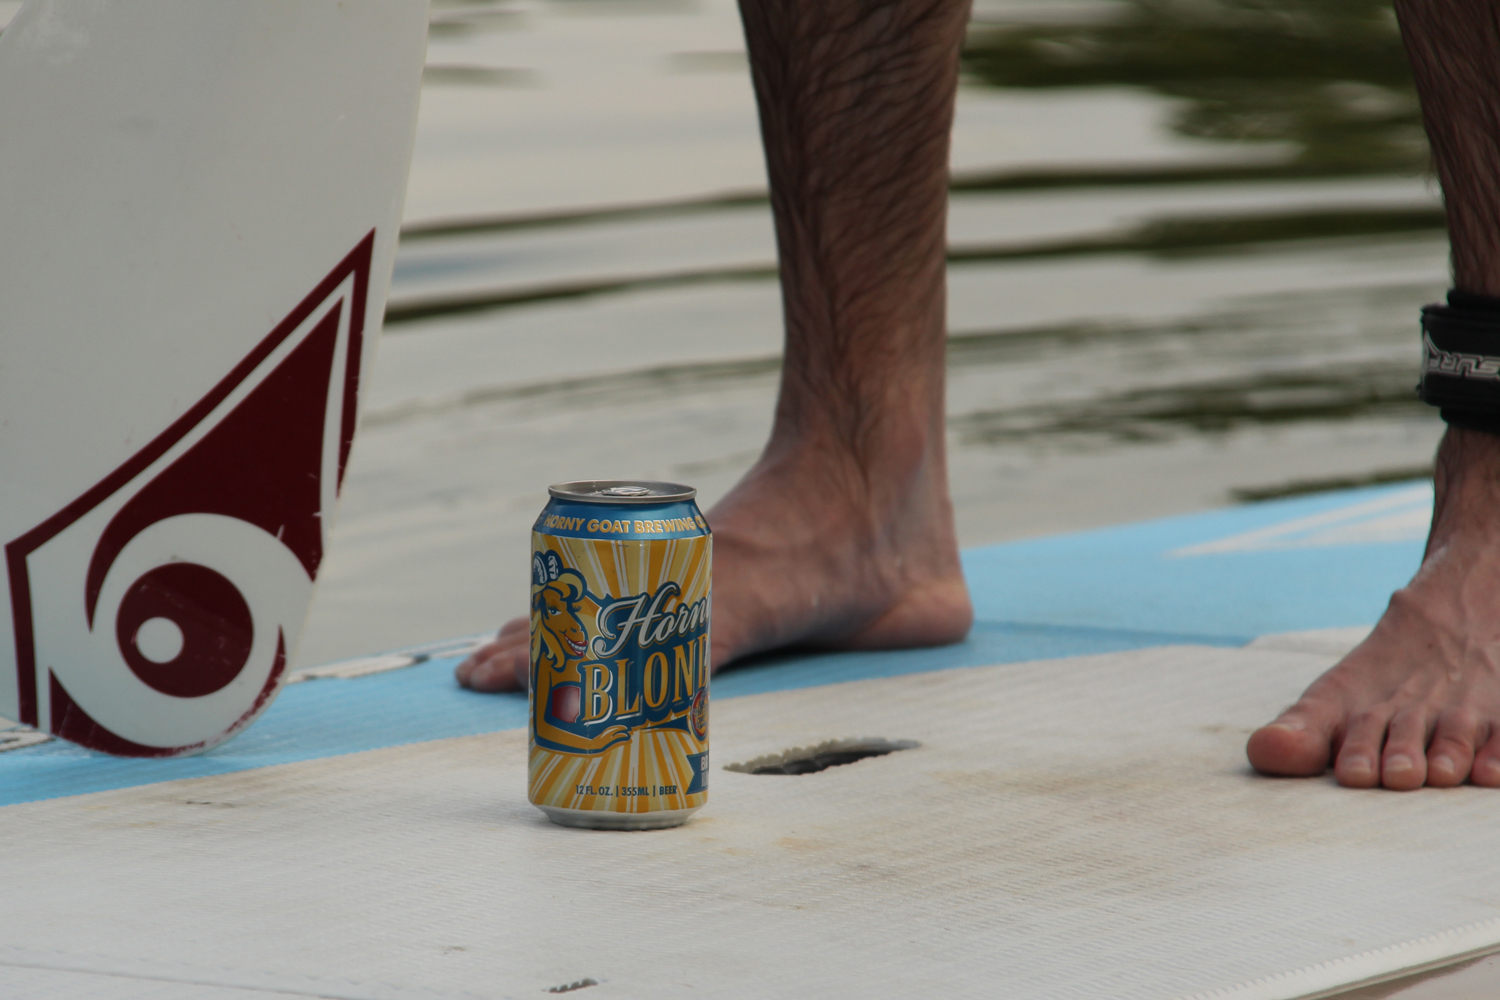 Horny Goat Blonde summer lager is great for summer paddle boarding.